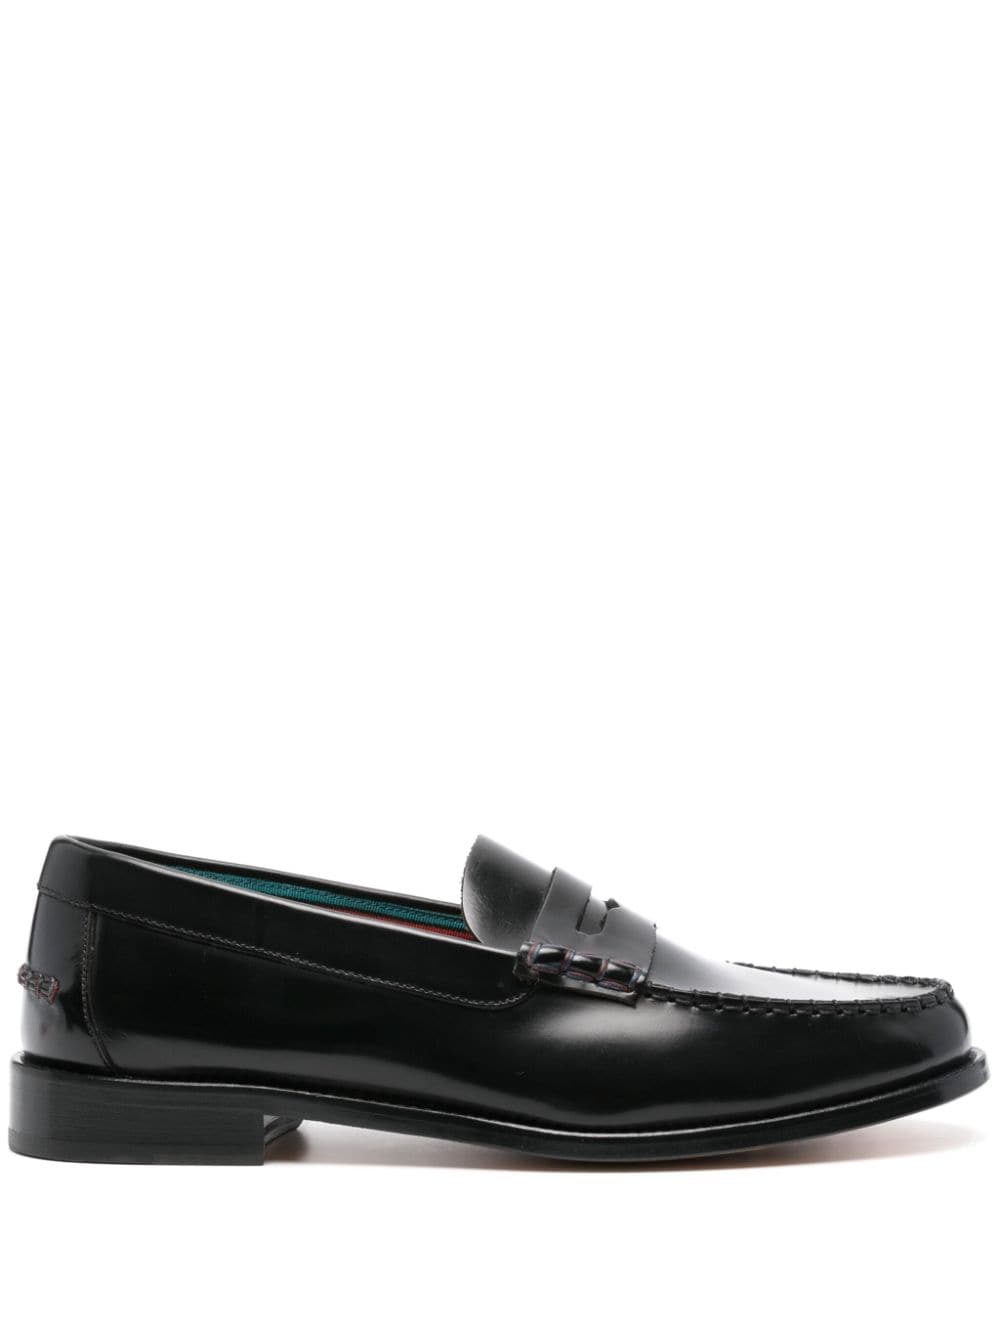 Paul Smith leather penny loafers - Black von Paul Smith